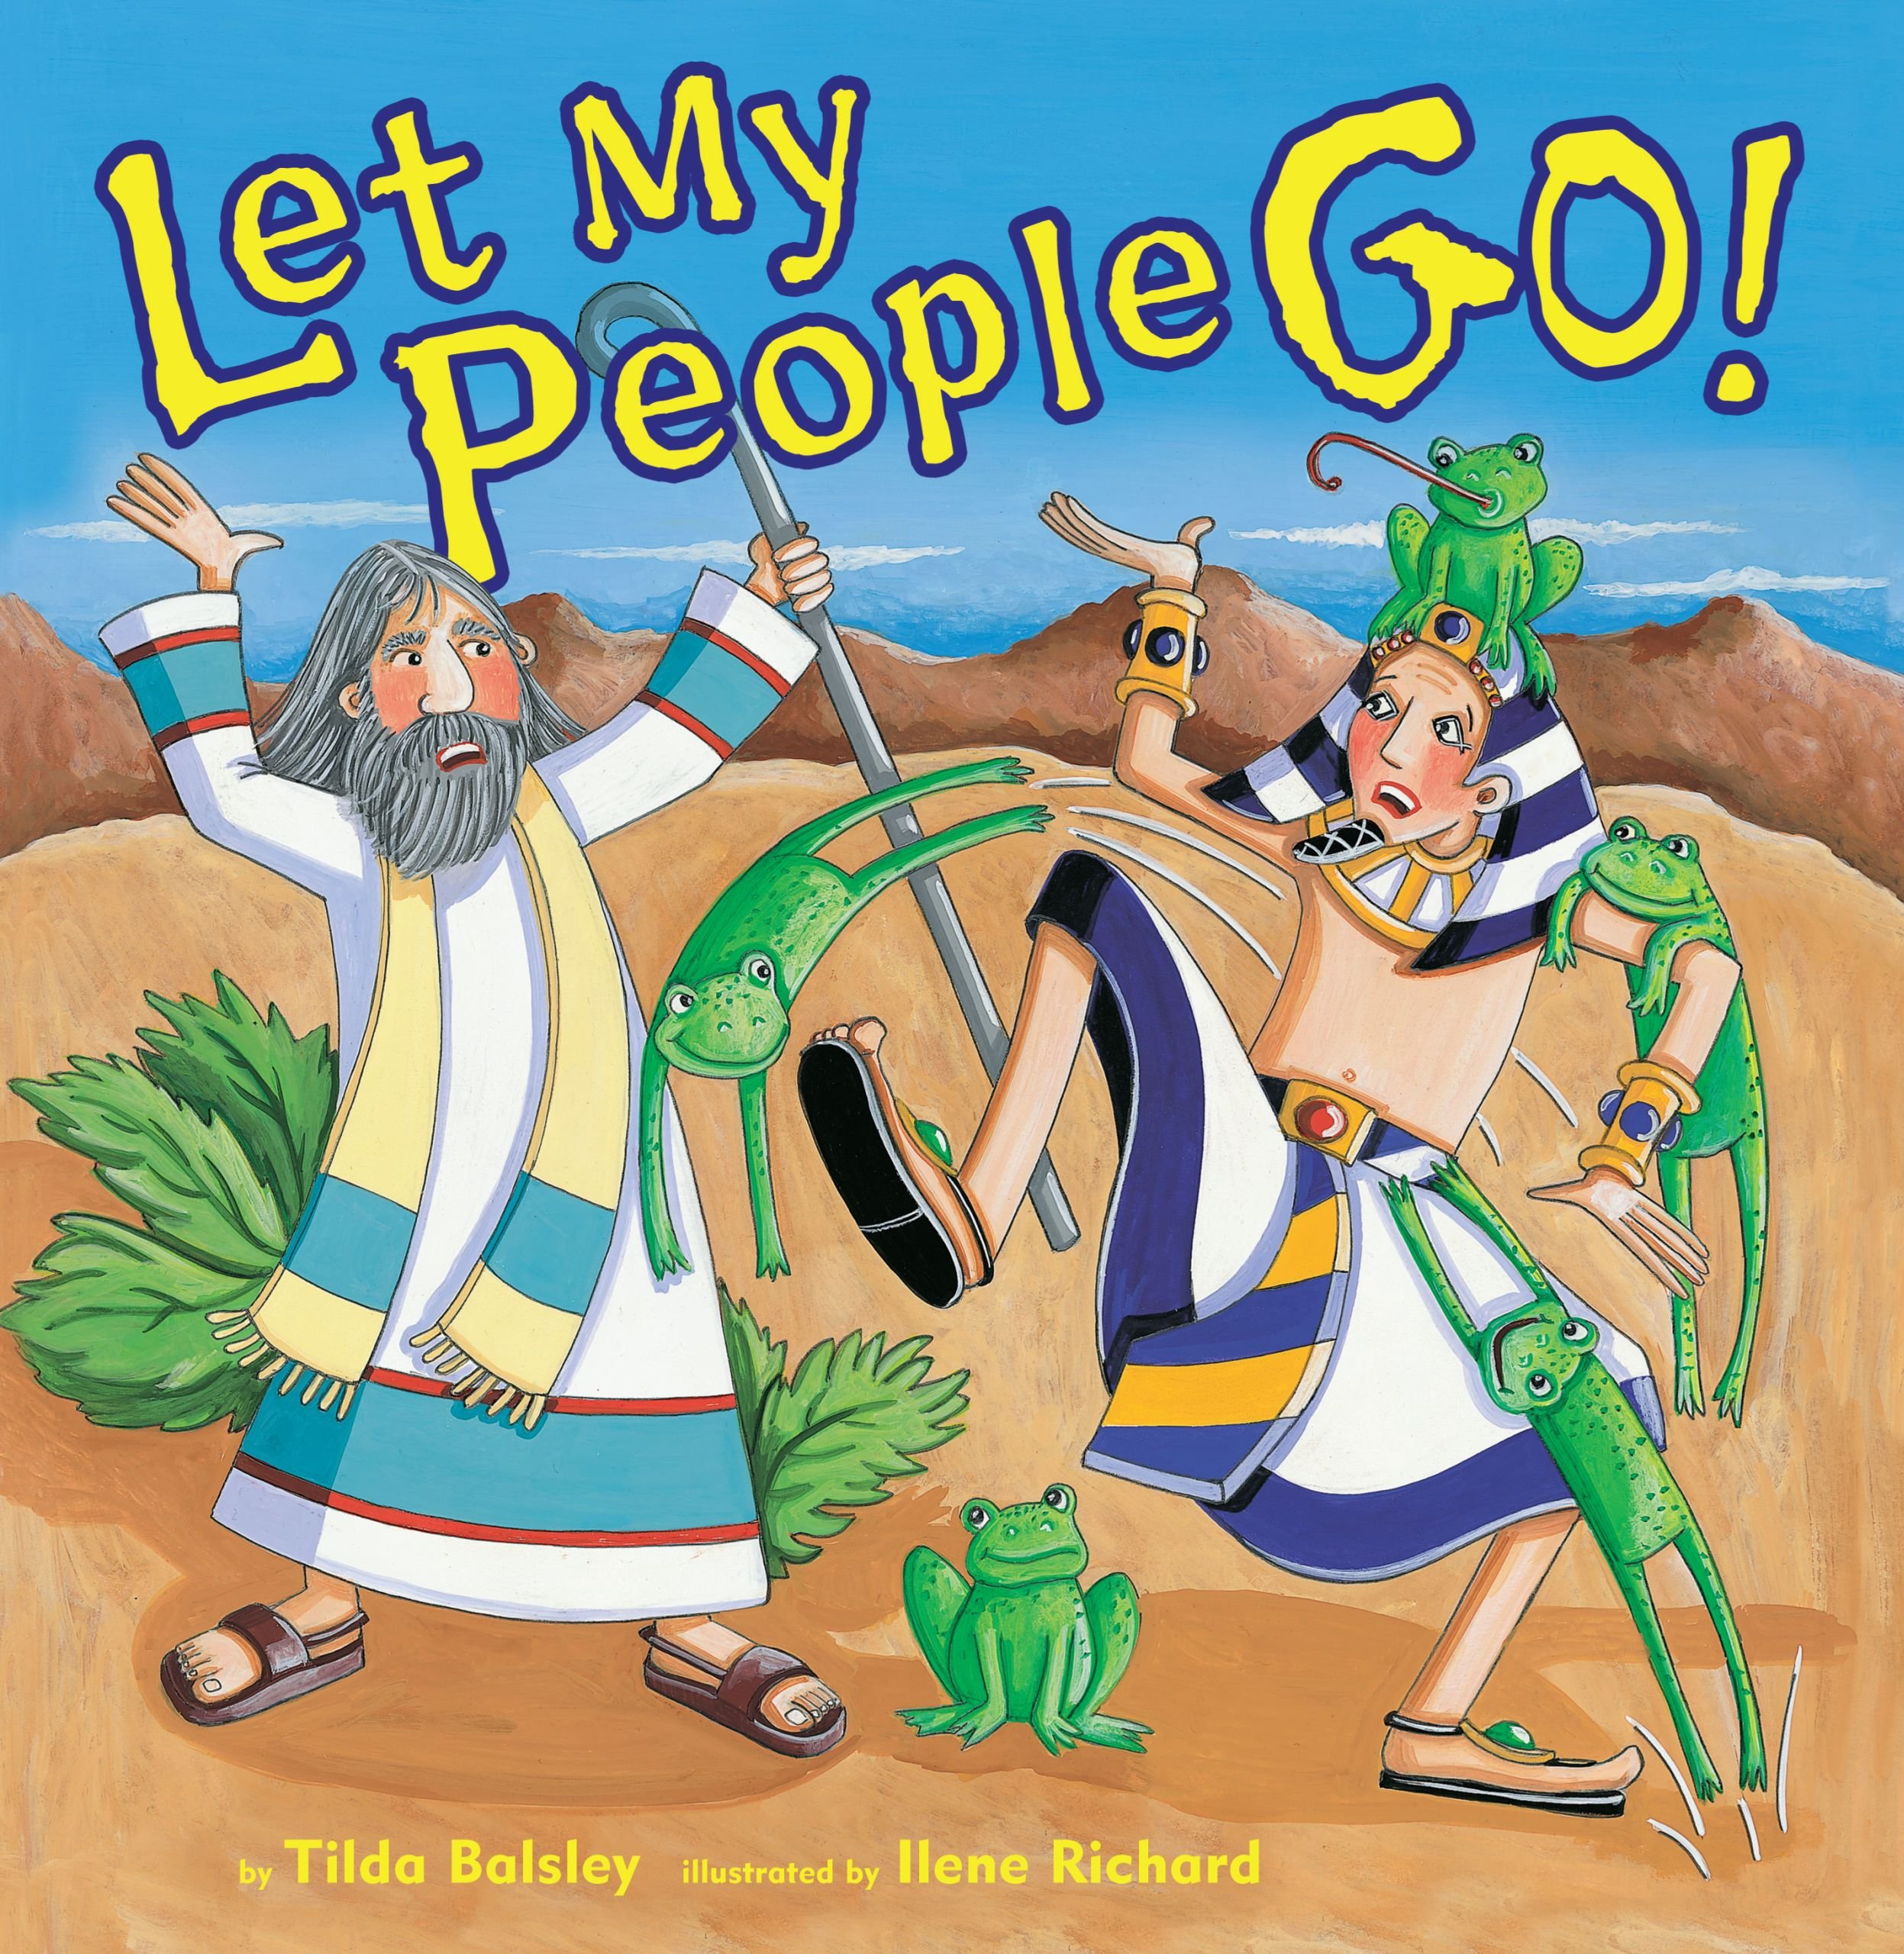 moses clipart let my people go